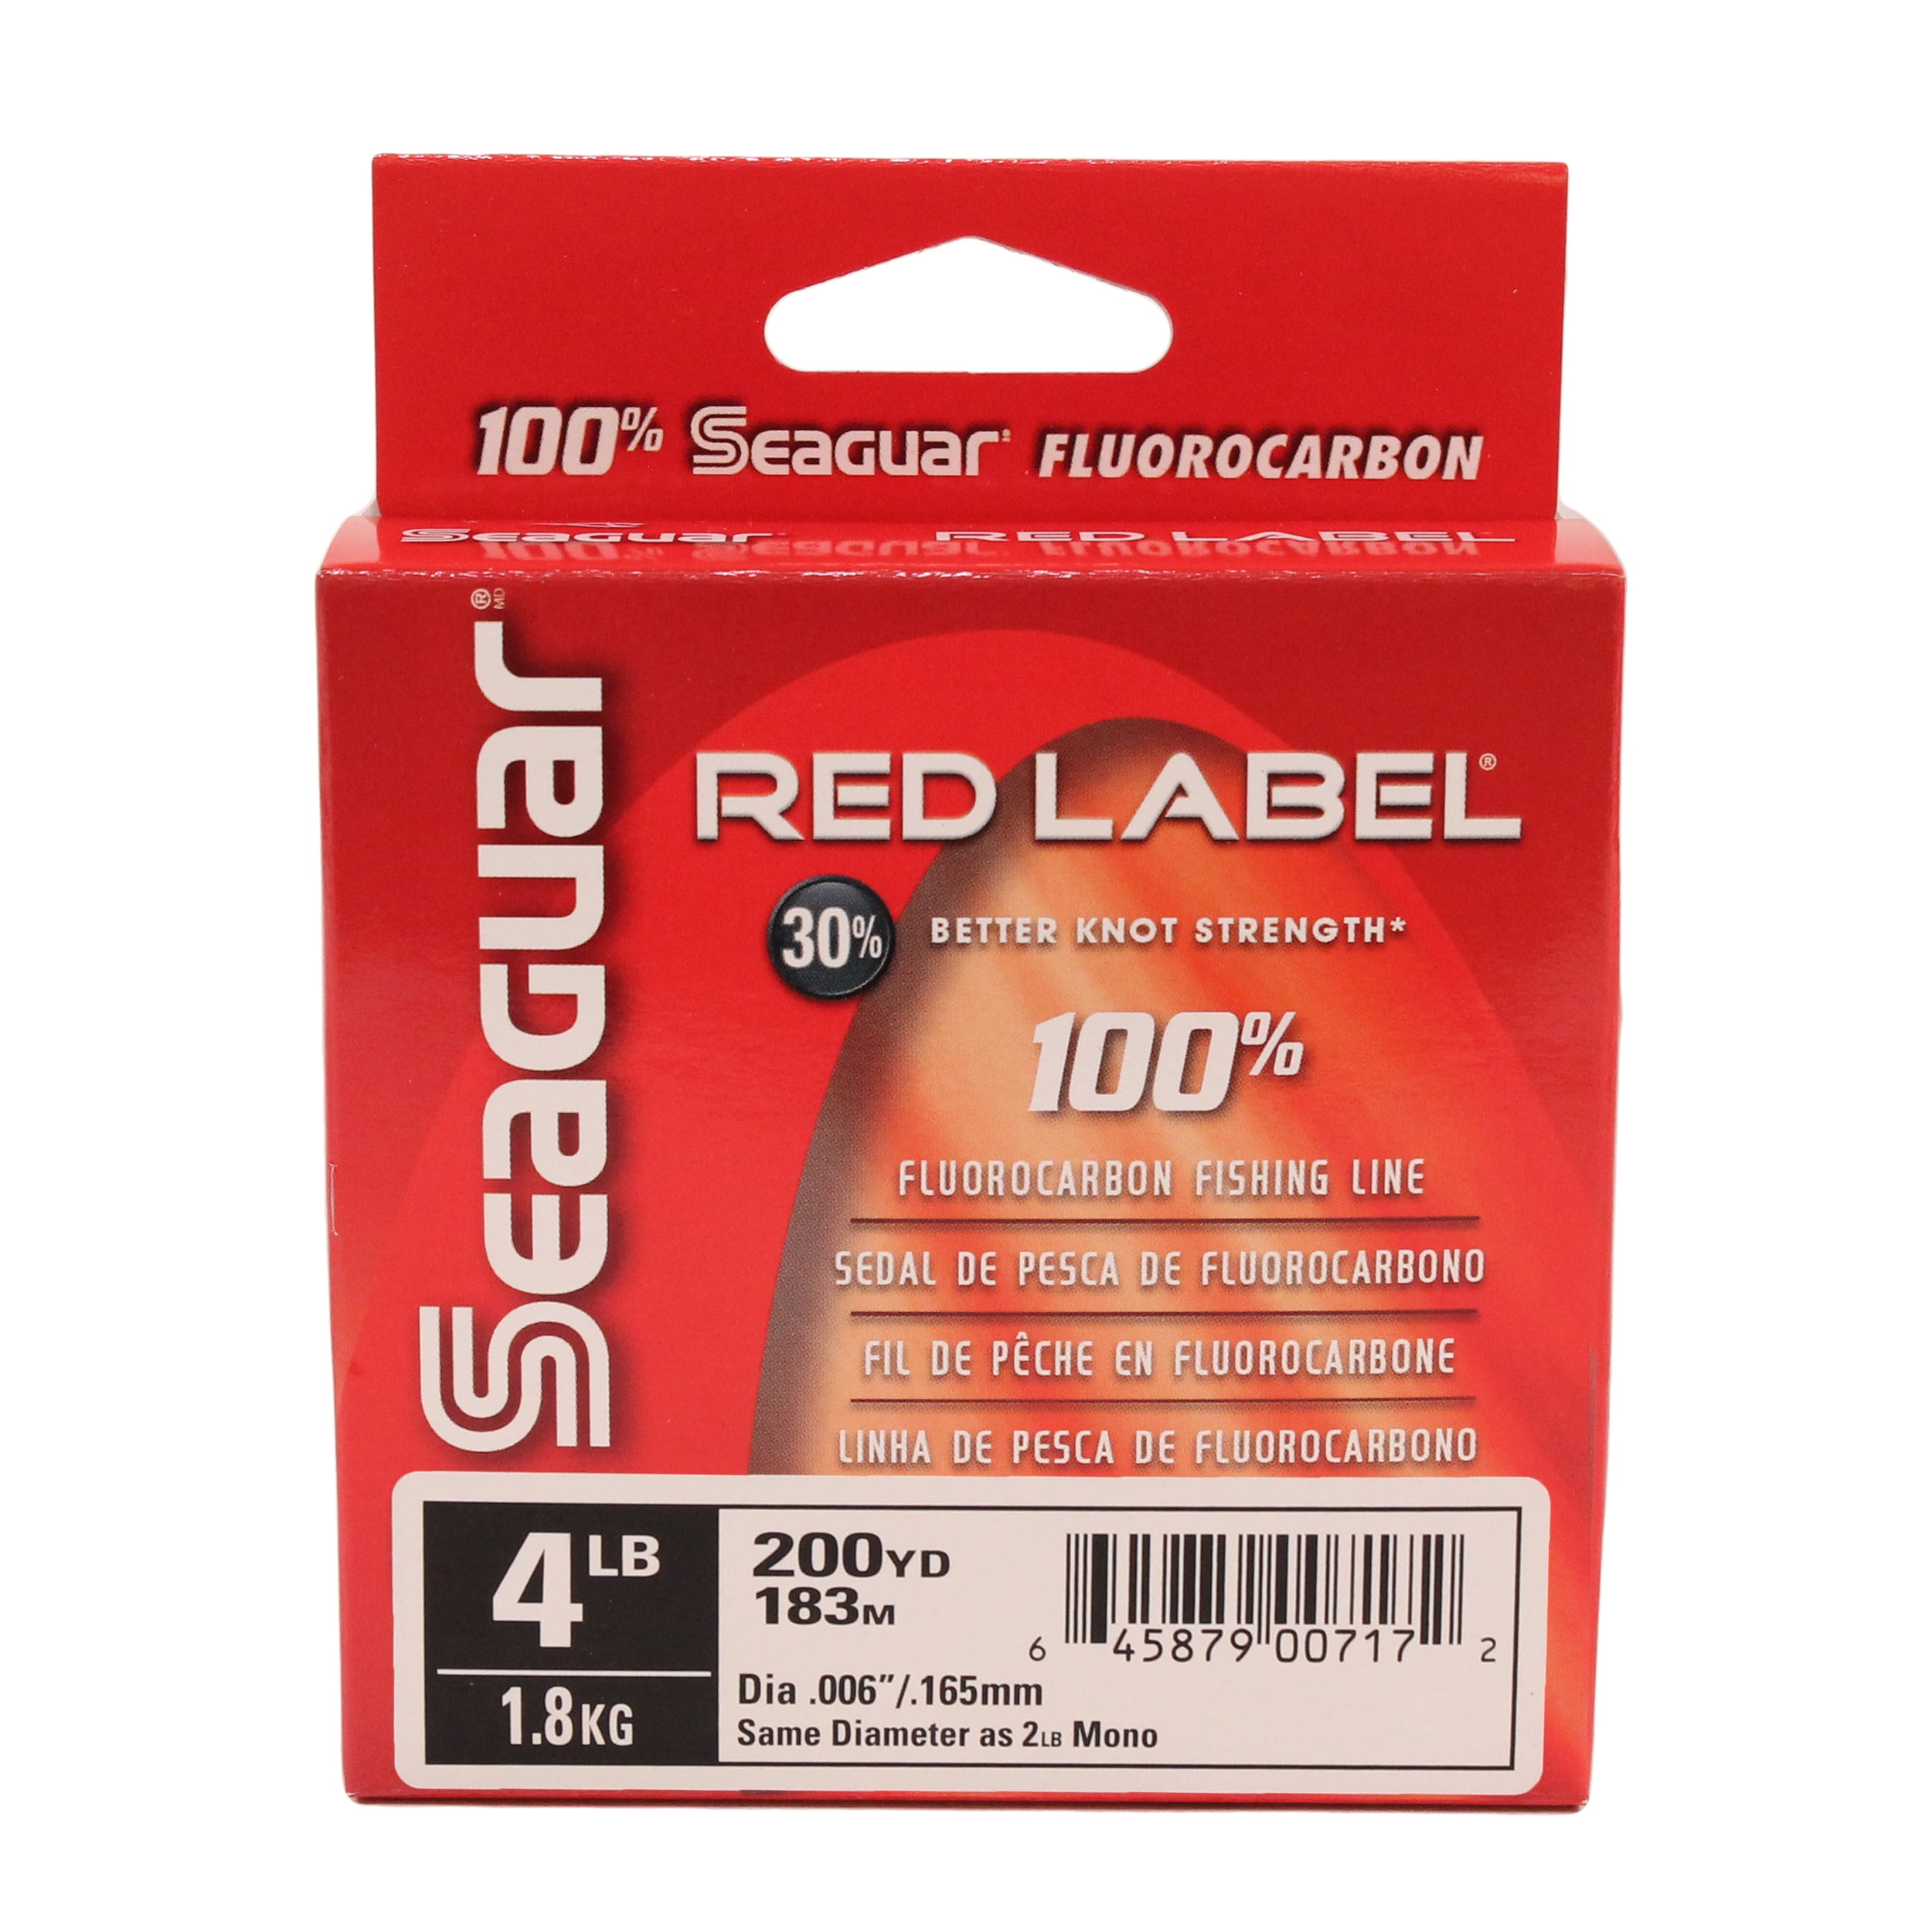 Seaguar Red Label 100% Fluorocarbon Fishing Line 4lbs, 200yds